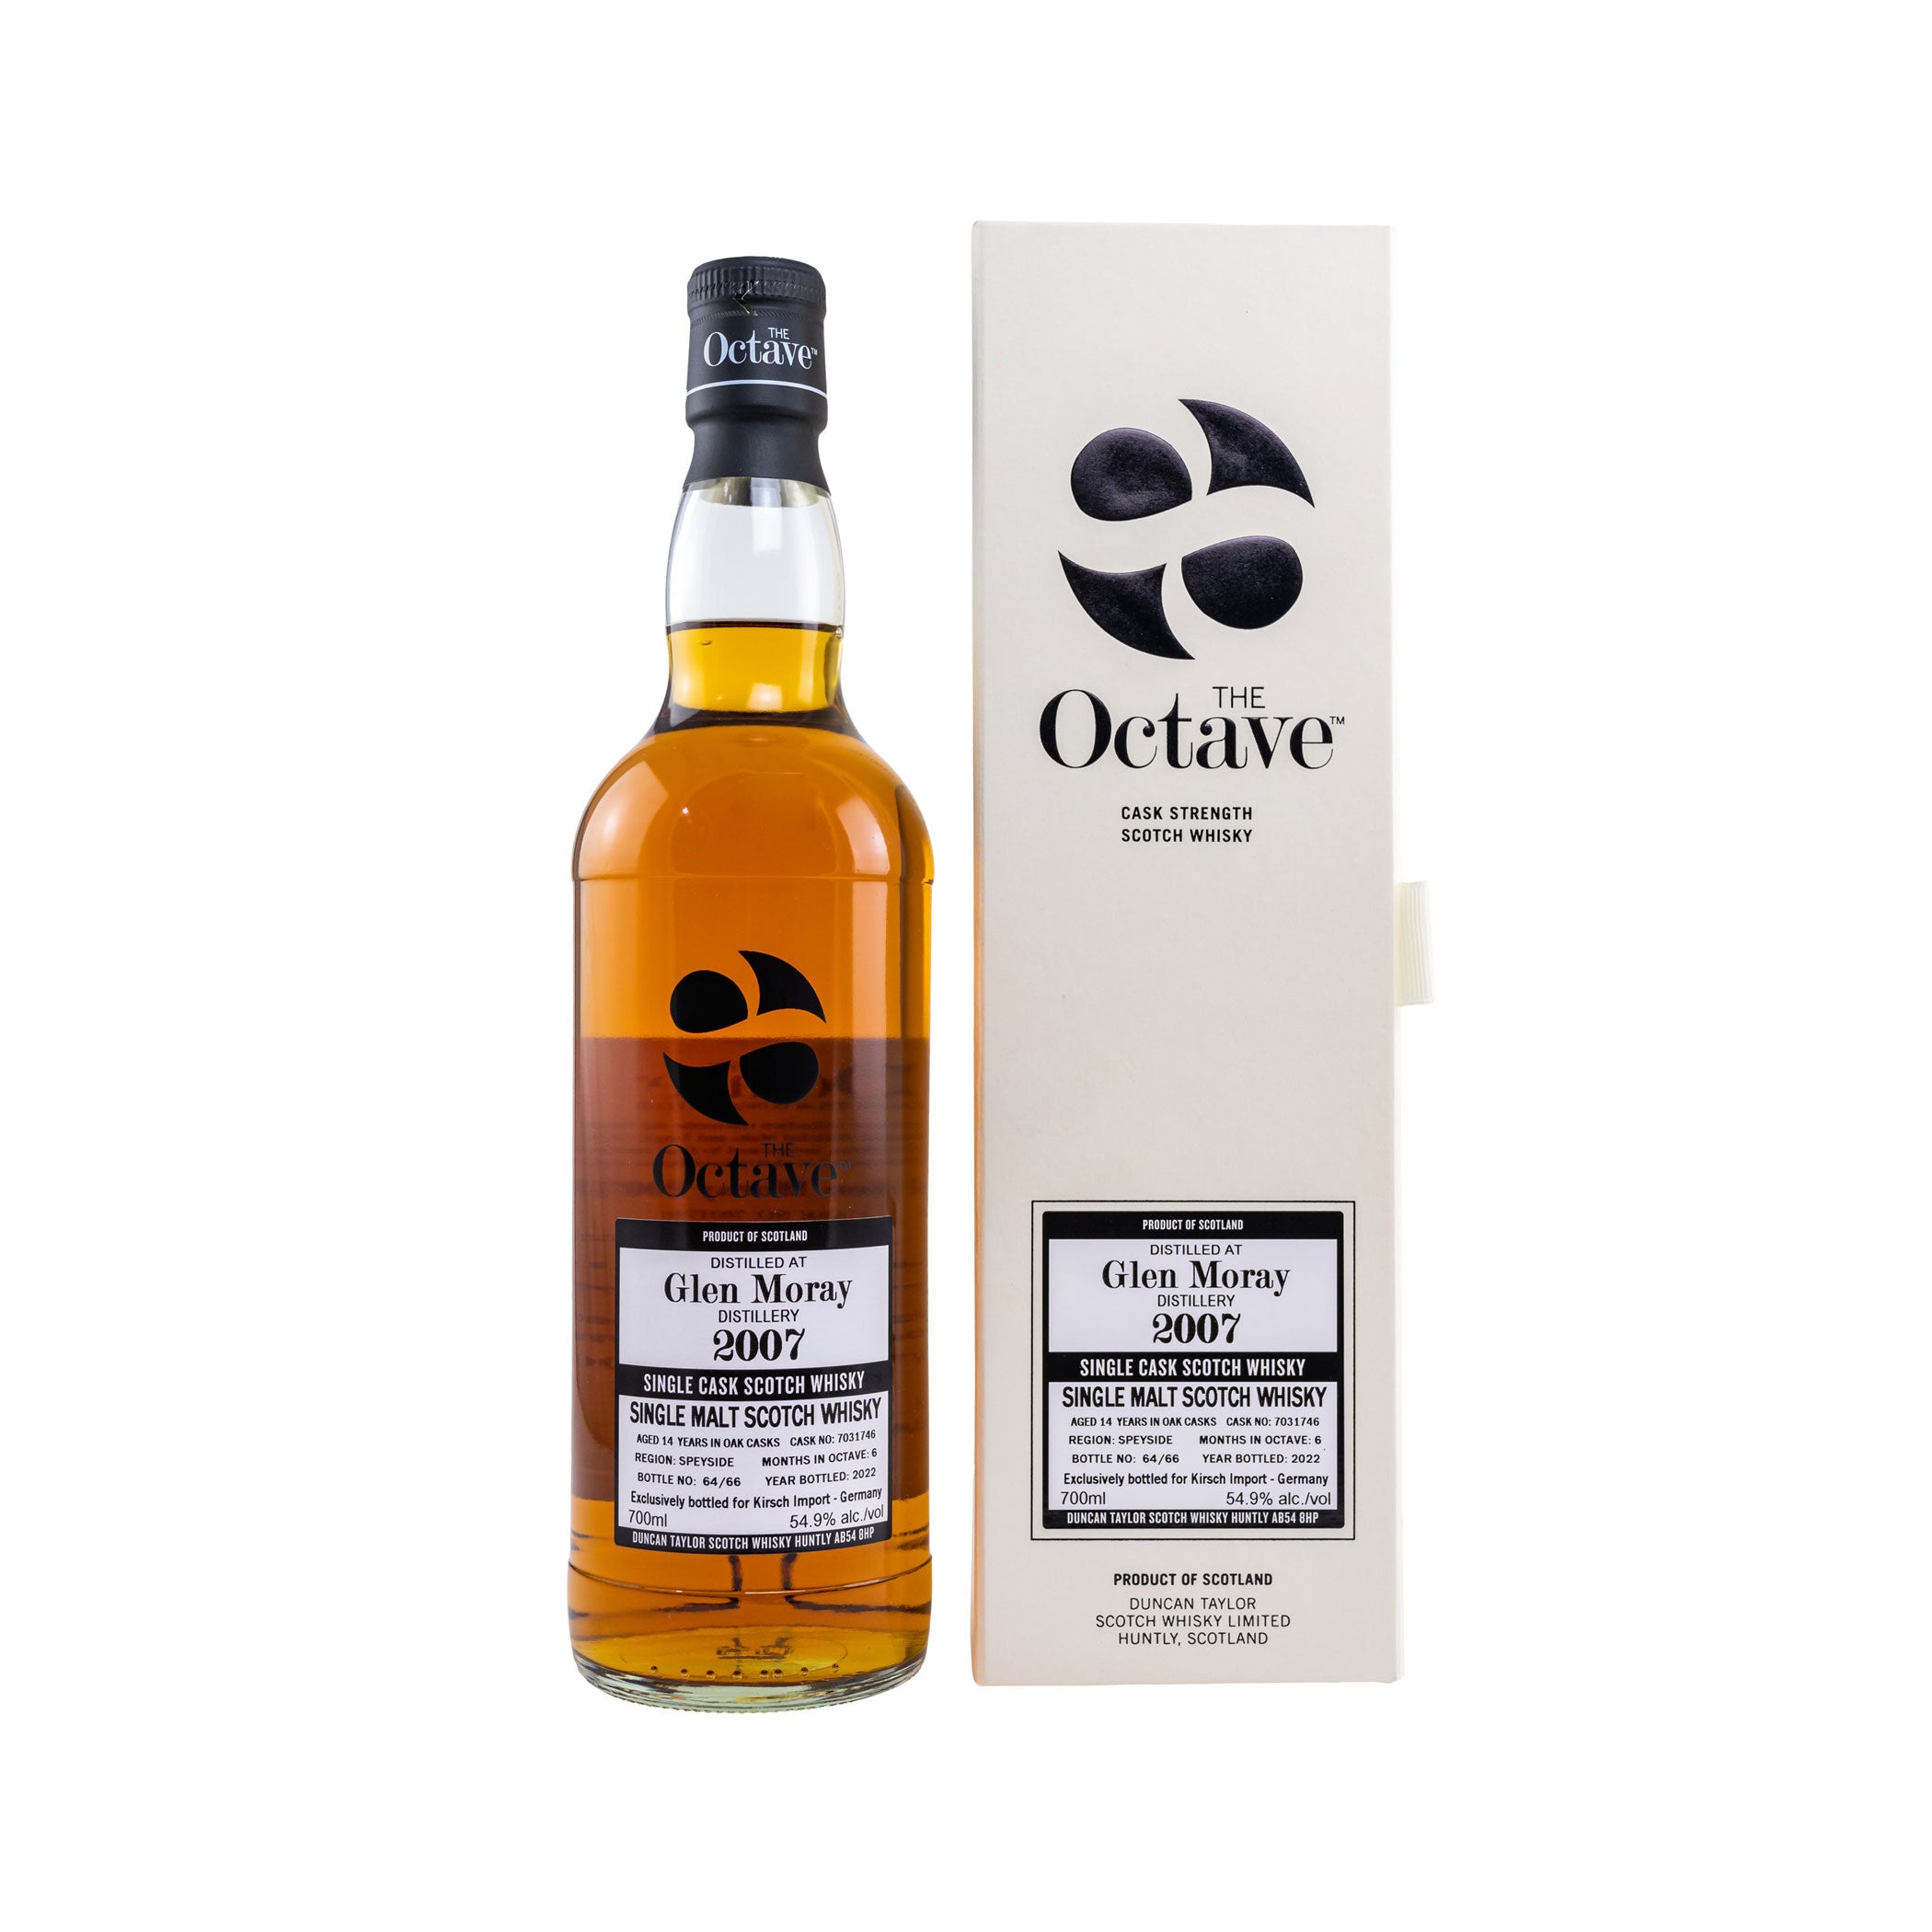 Glen Moray 2007/2022 - 14 Years - Single Cask #7031746 - The Octave (Duncan Taylor)